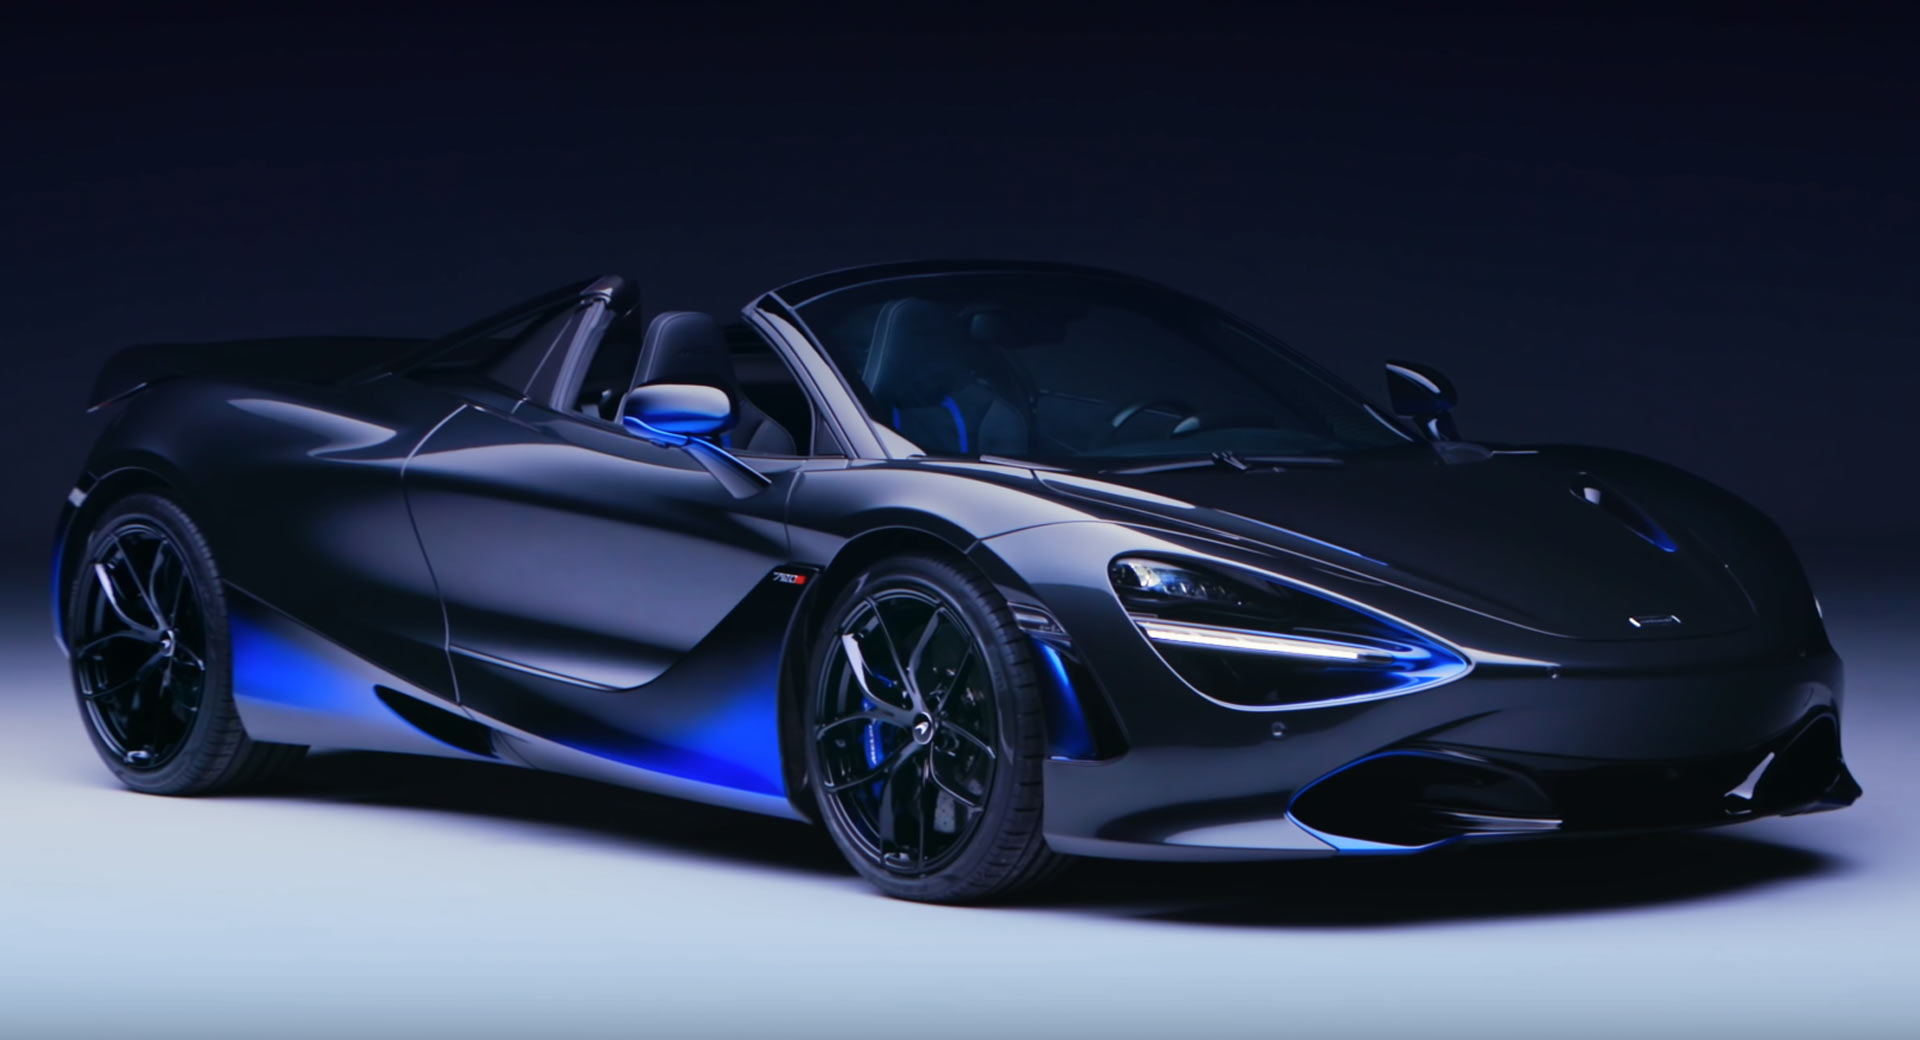 black and blue 720s